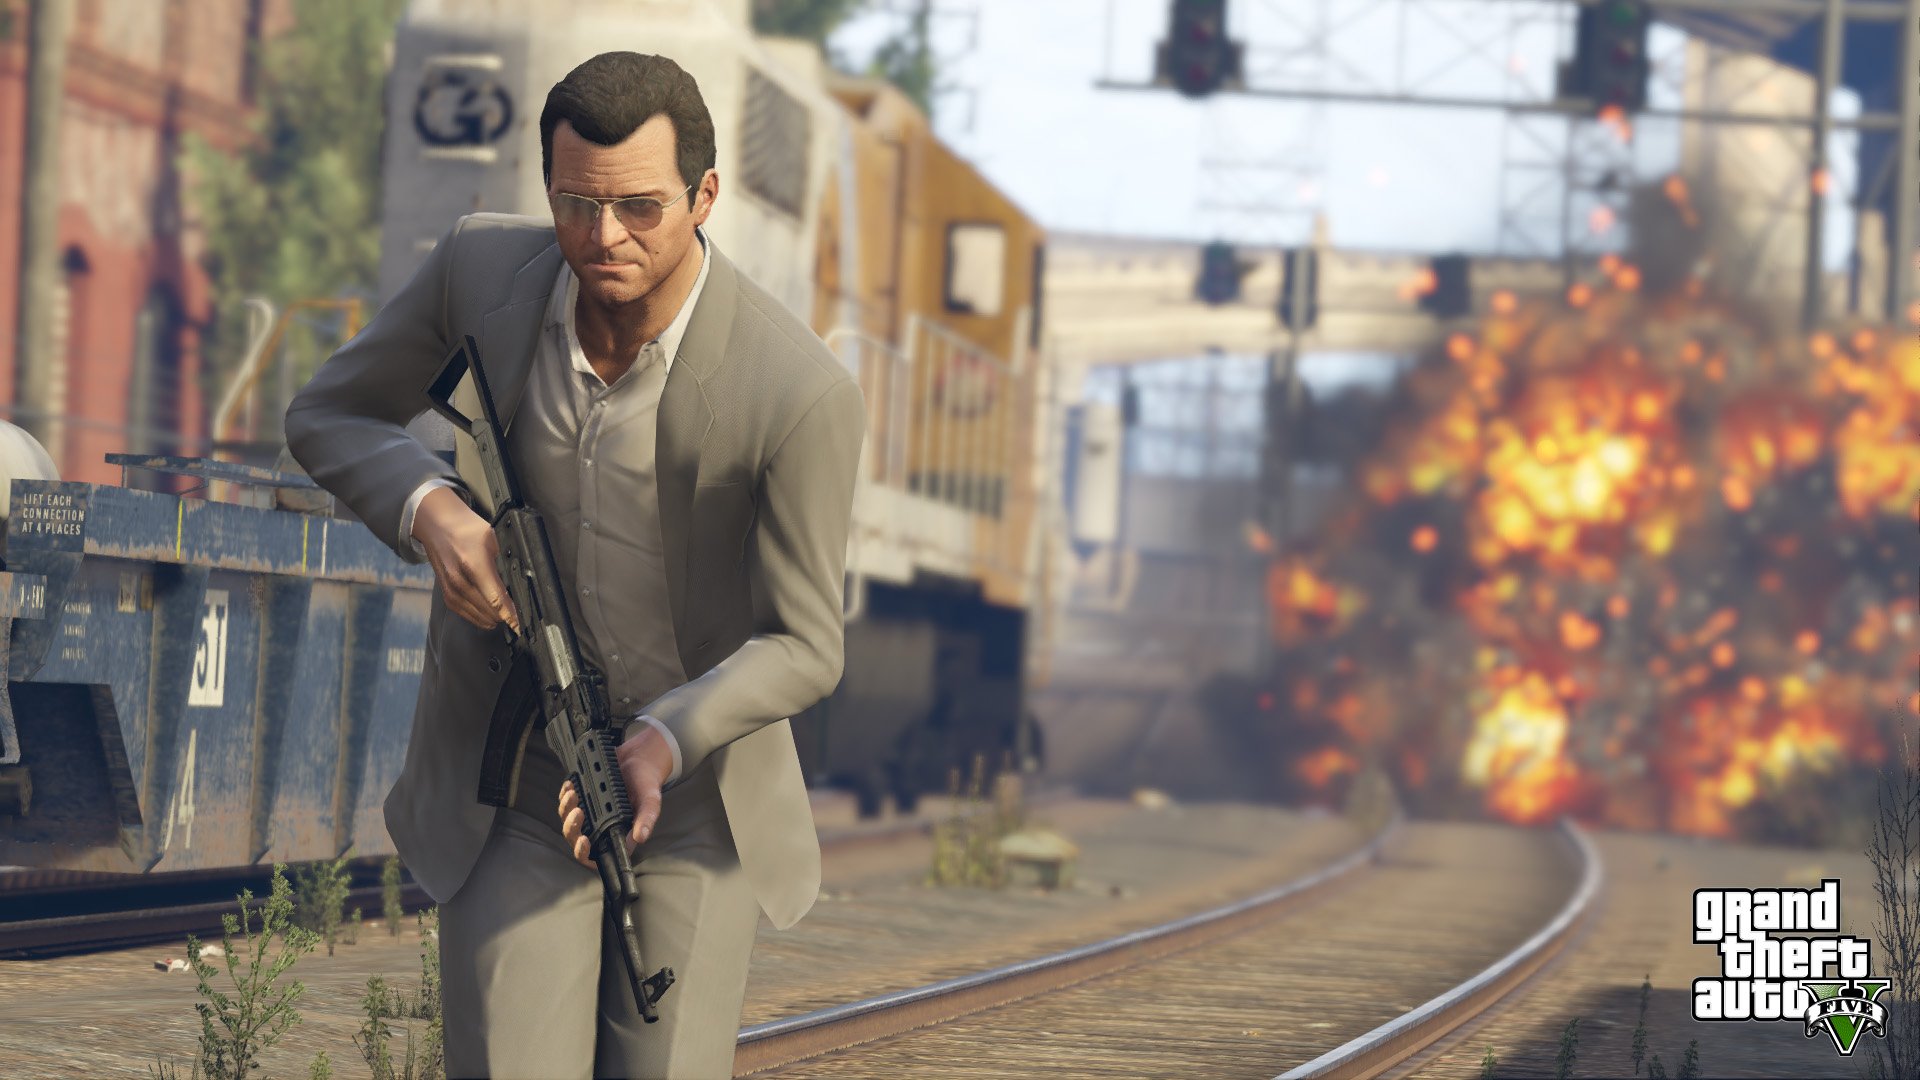 Open up your world with Xbox One GTA 5 cheats.